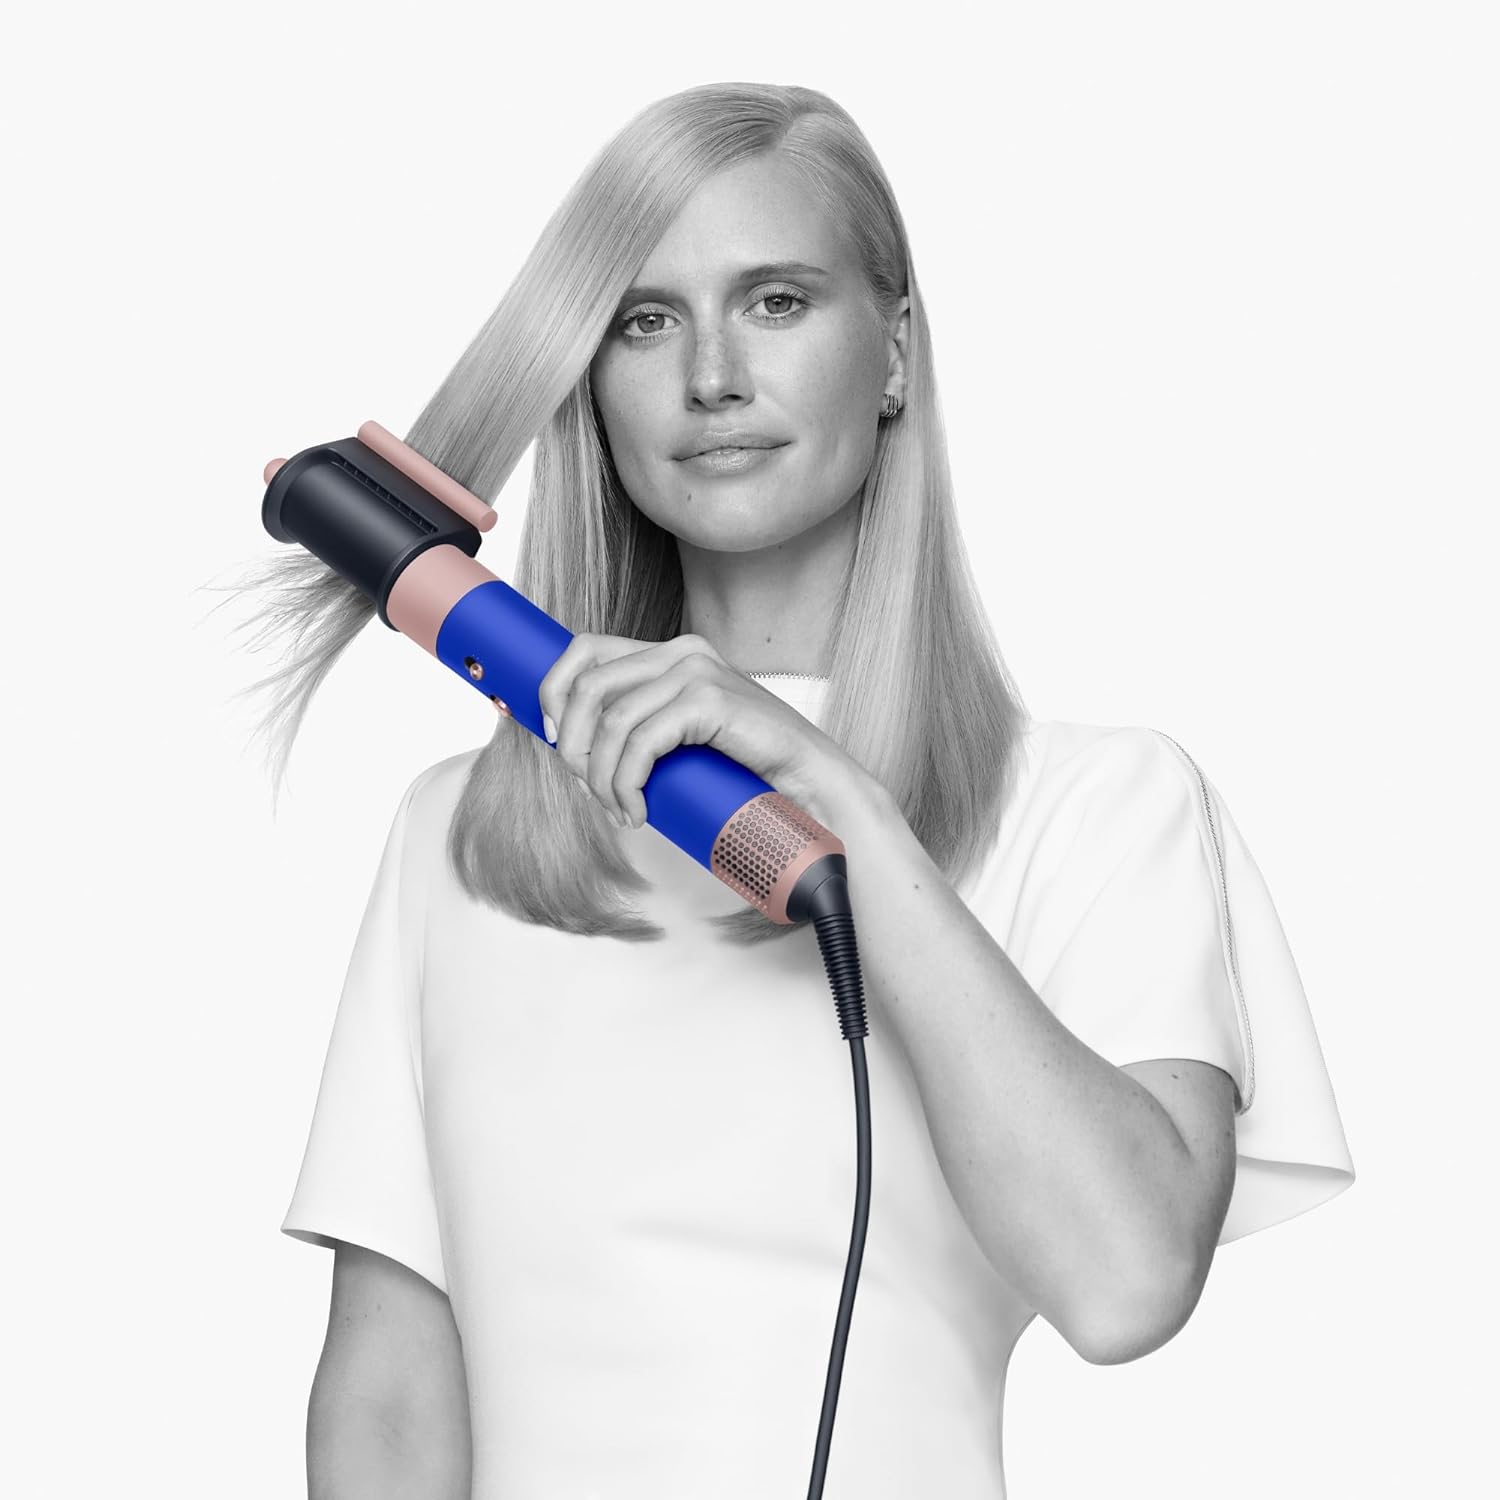 Dyson Airwrap Multi-Styler Complete Long in Special Edition Blue Blush